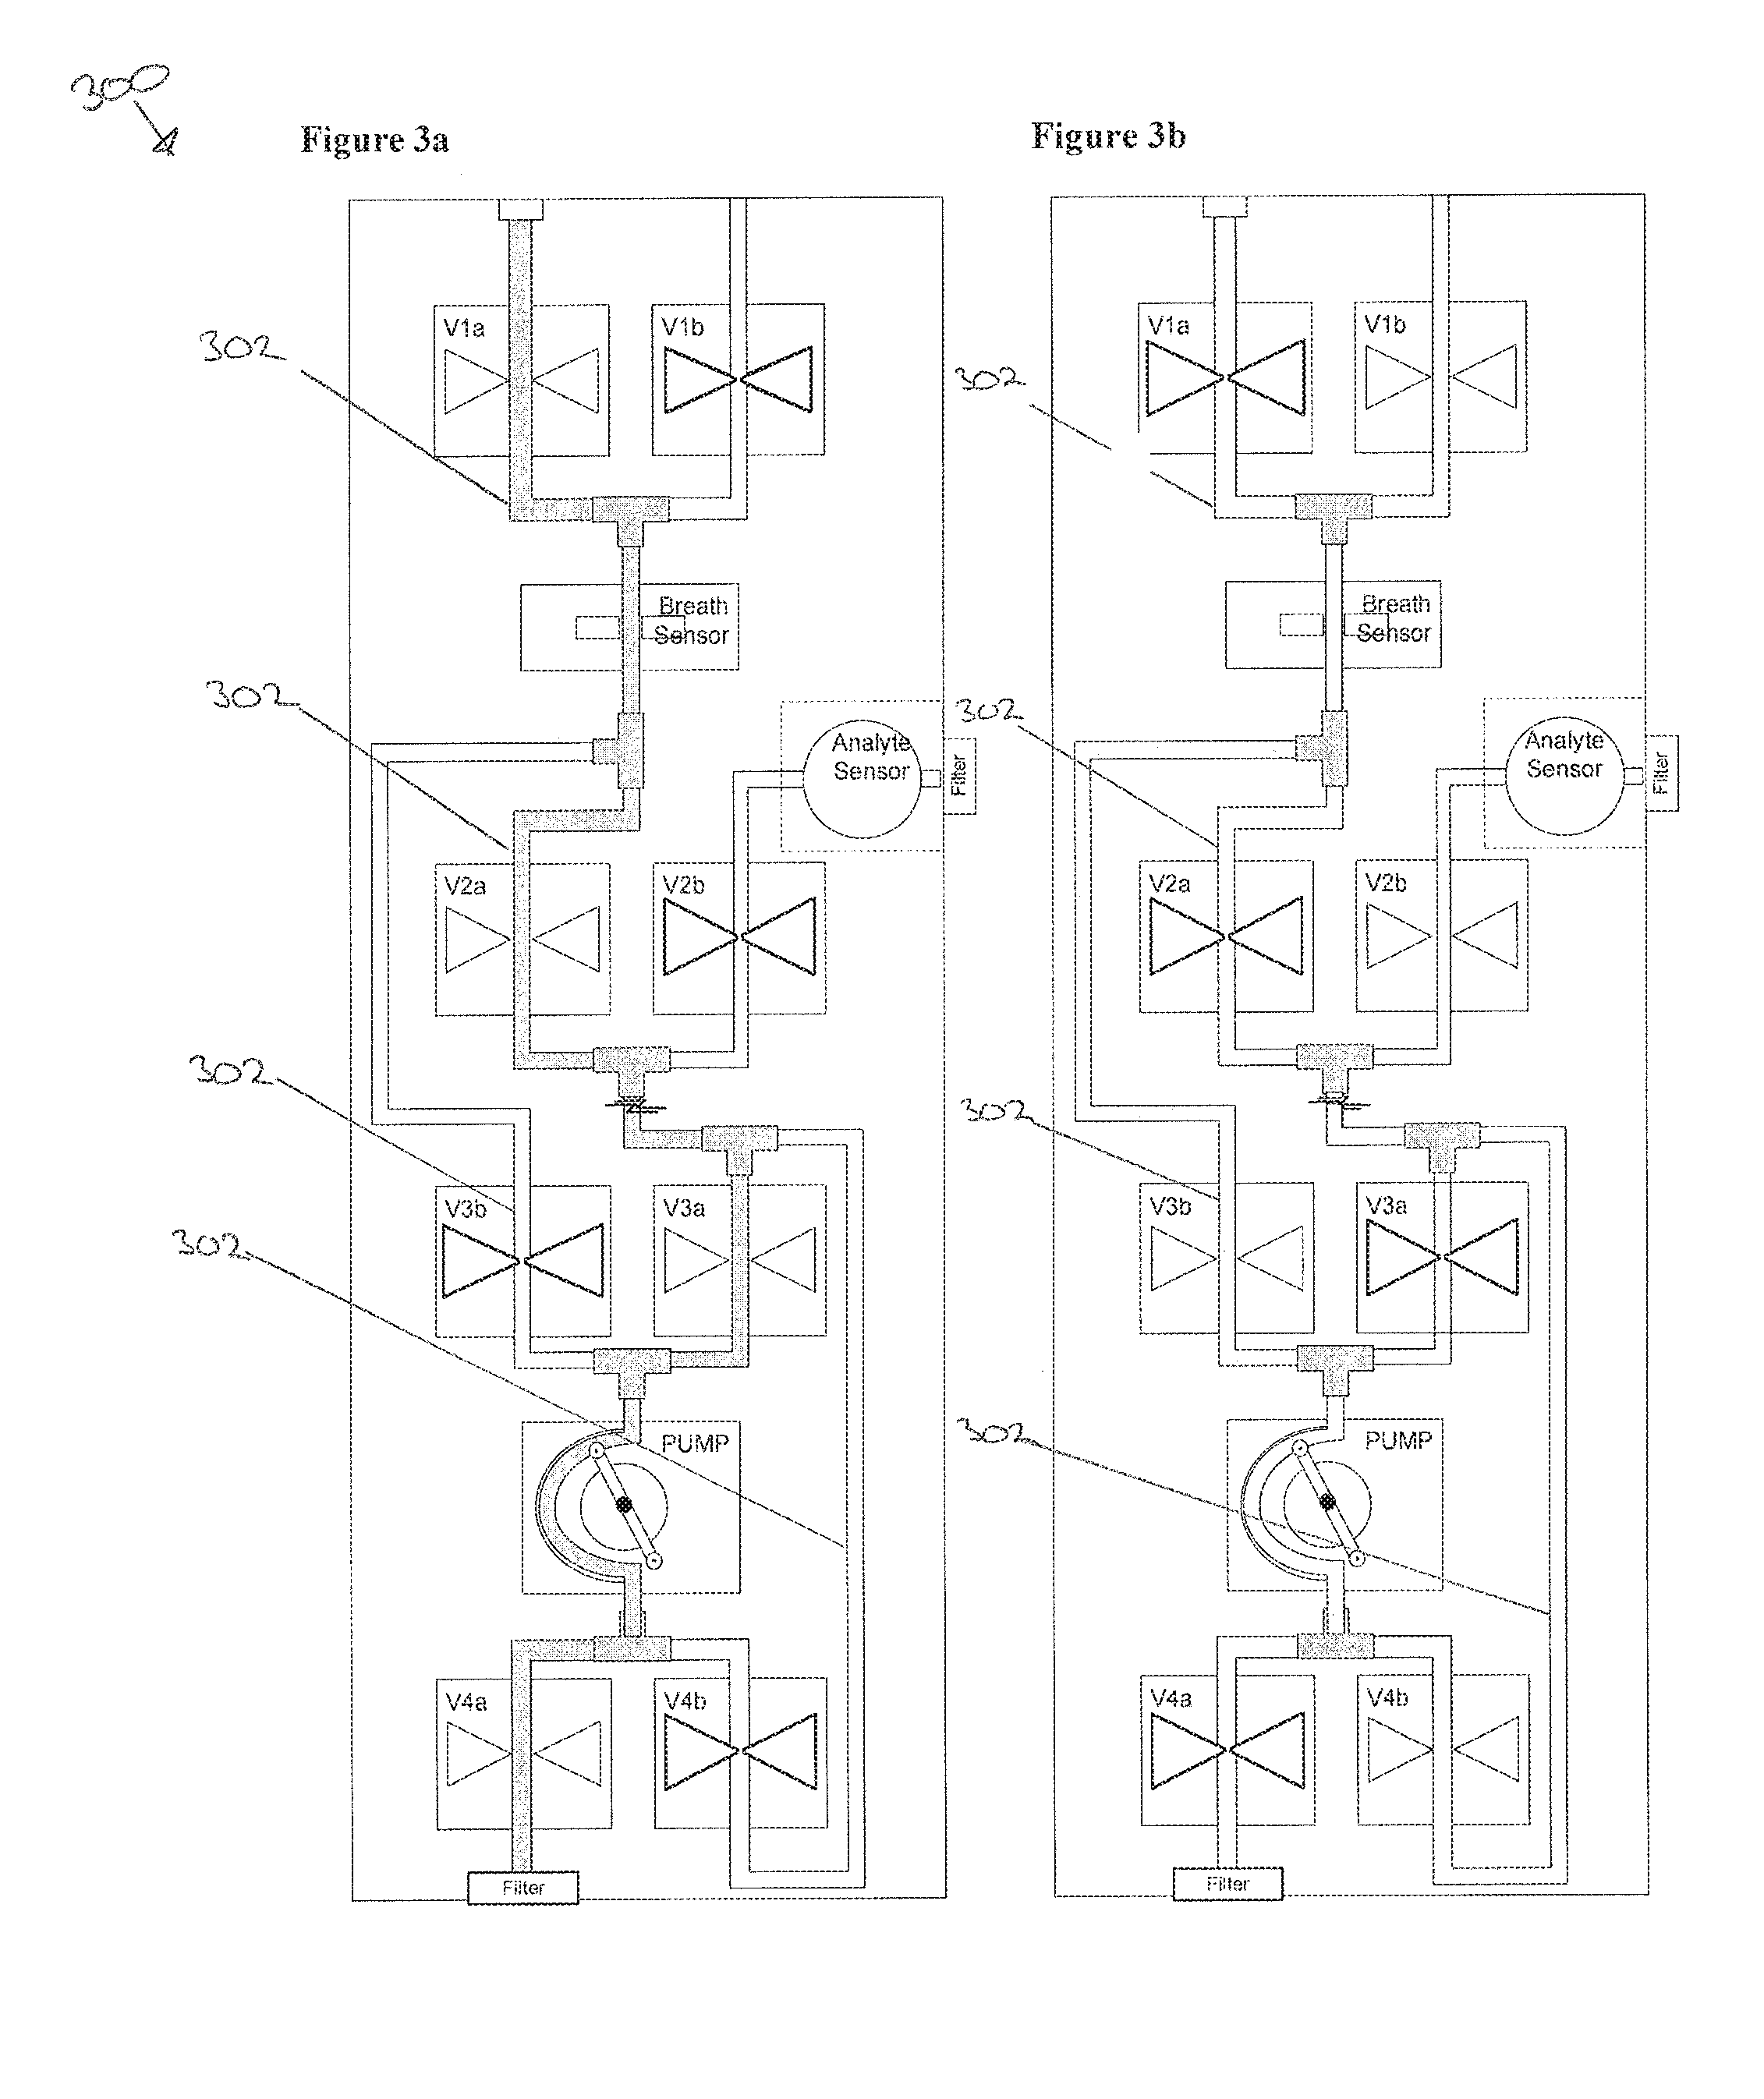 Breath analysis systems and methods for screening infectious diseases